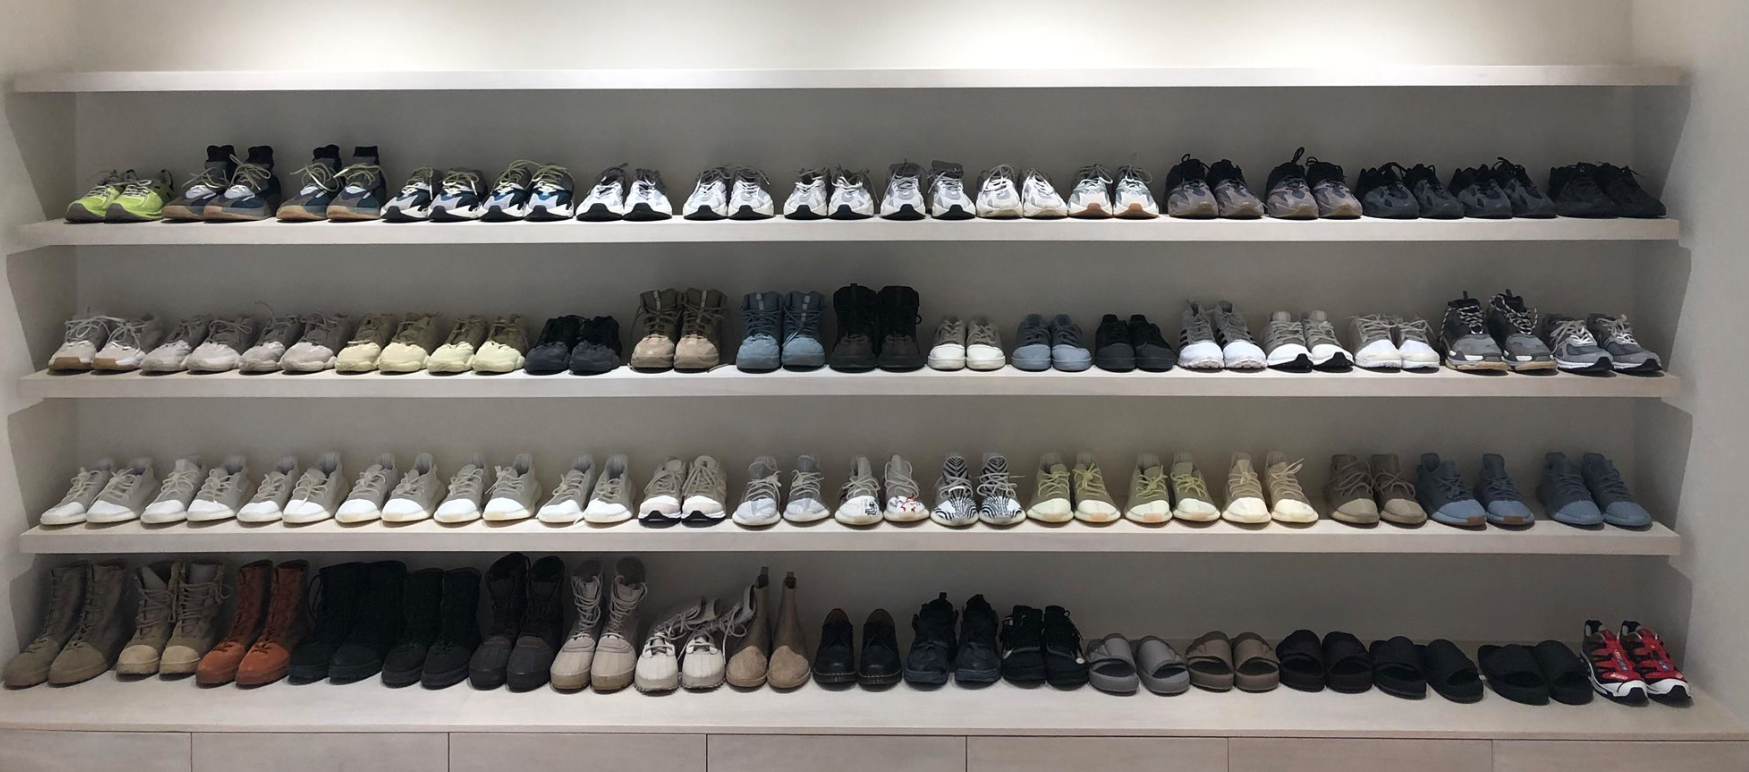 kanye west shoes collection